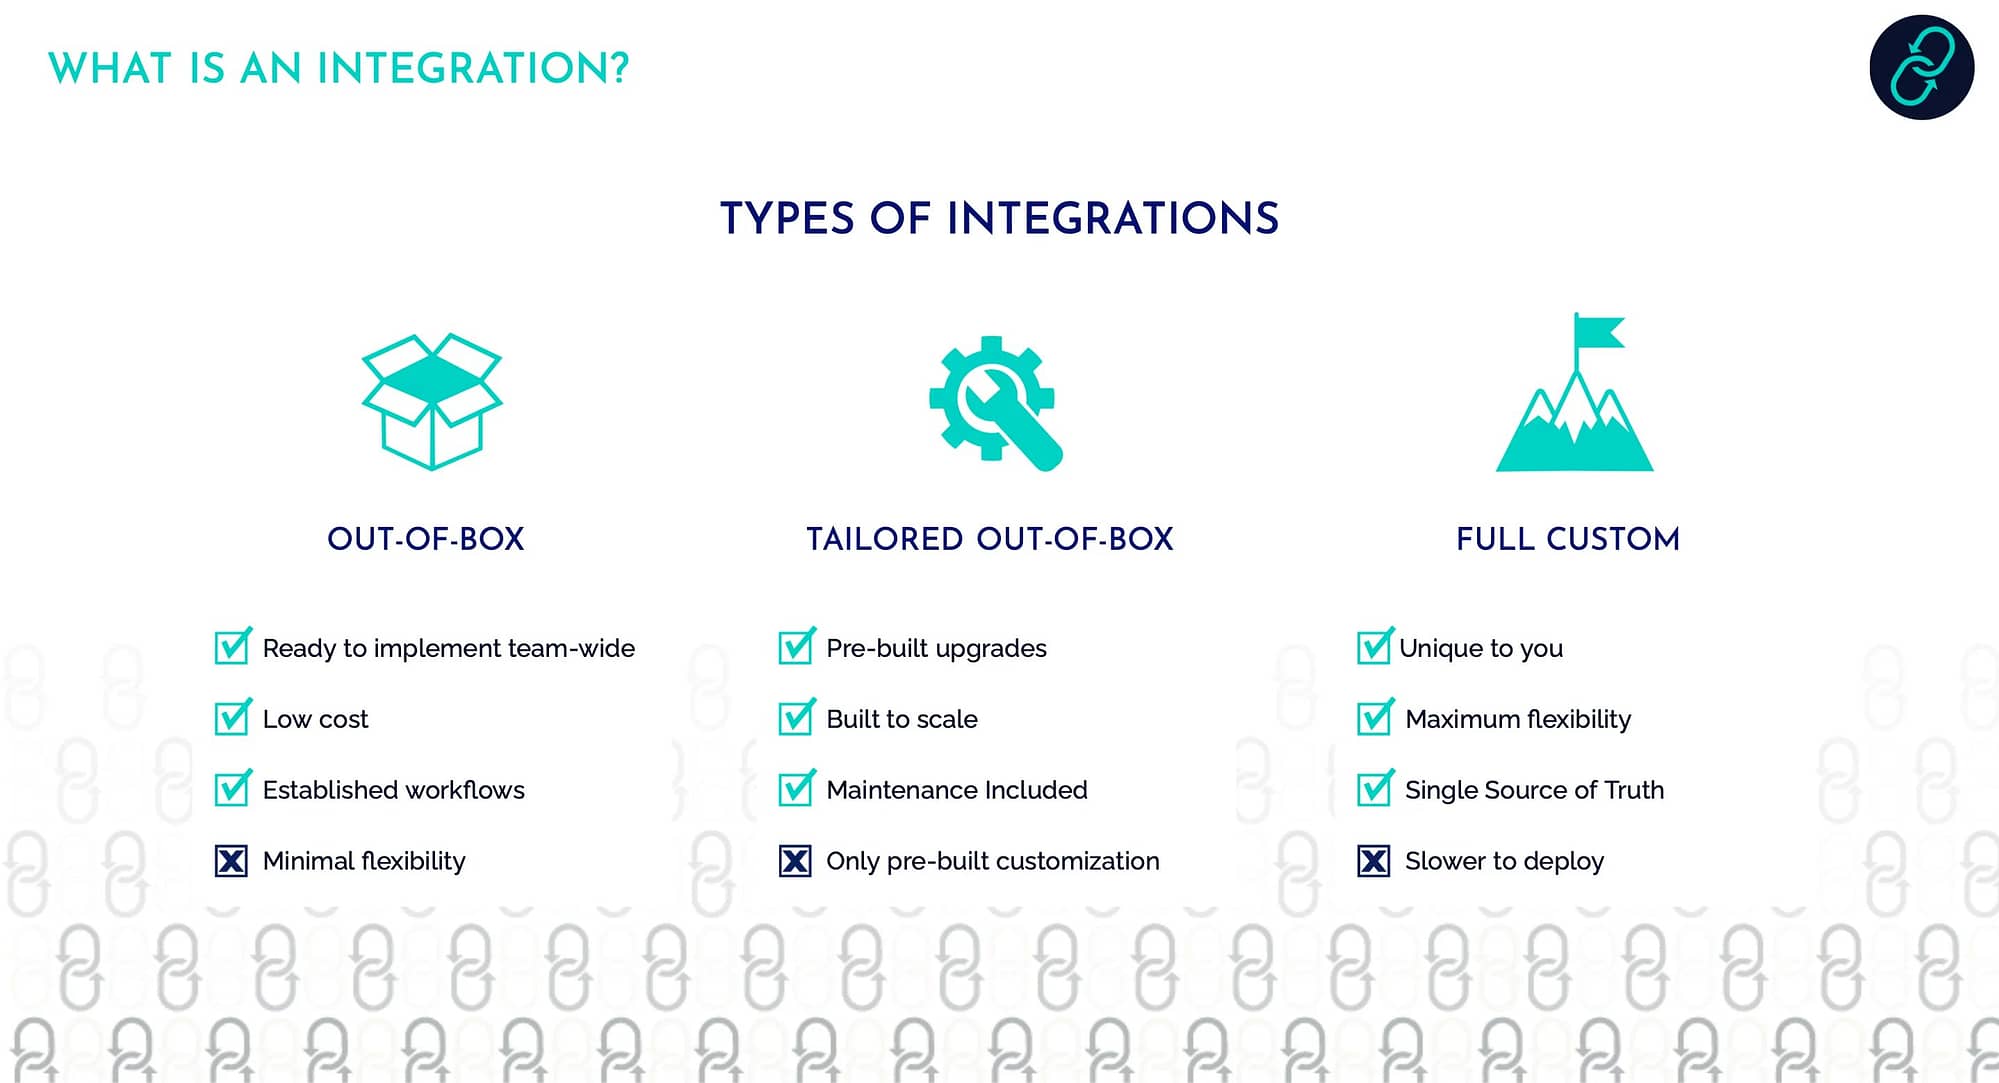 Do you integrate with ___ platform? Will my client need an Out-Of-Box or Custom Integration?